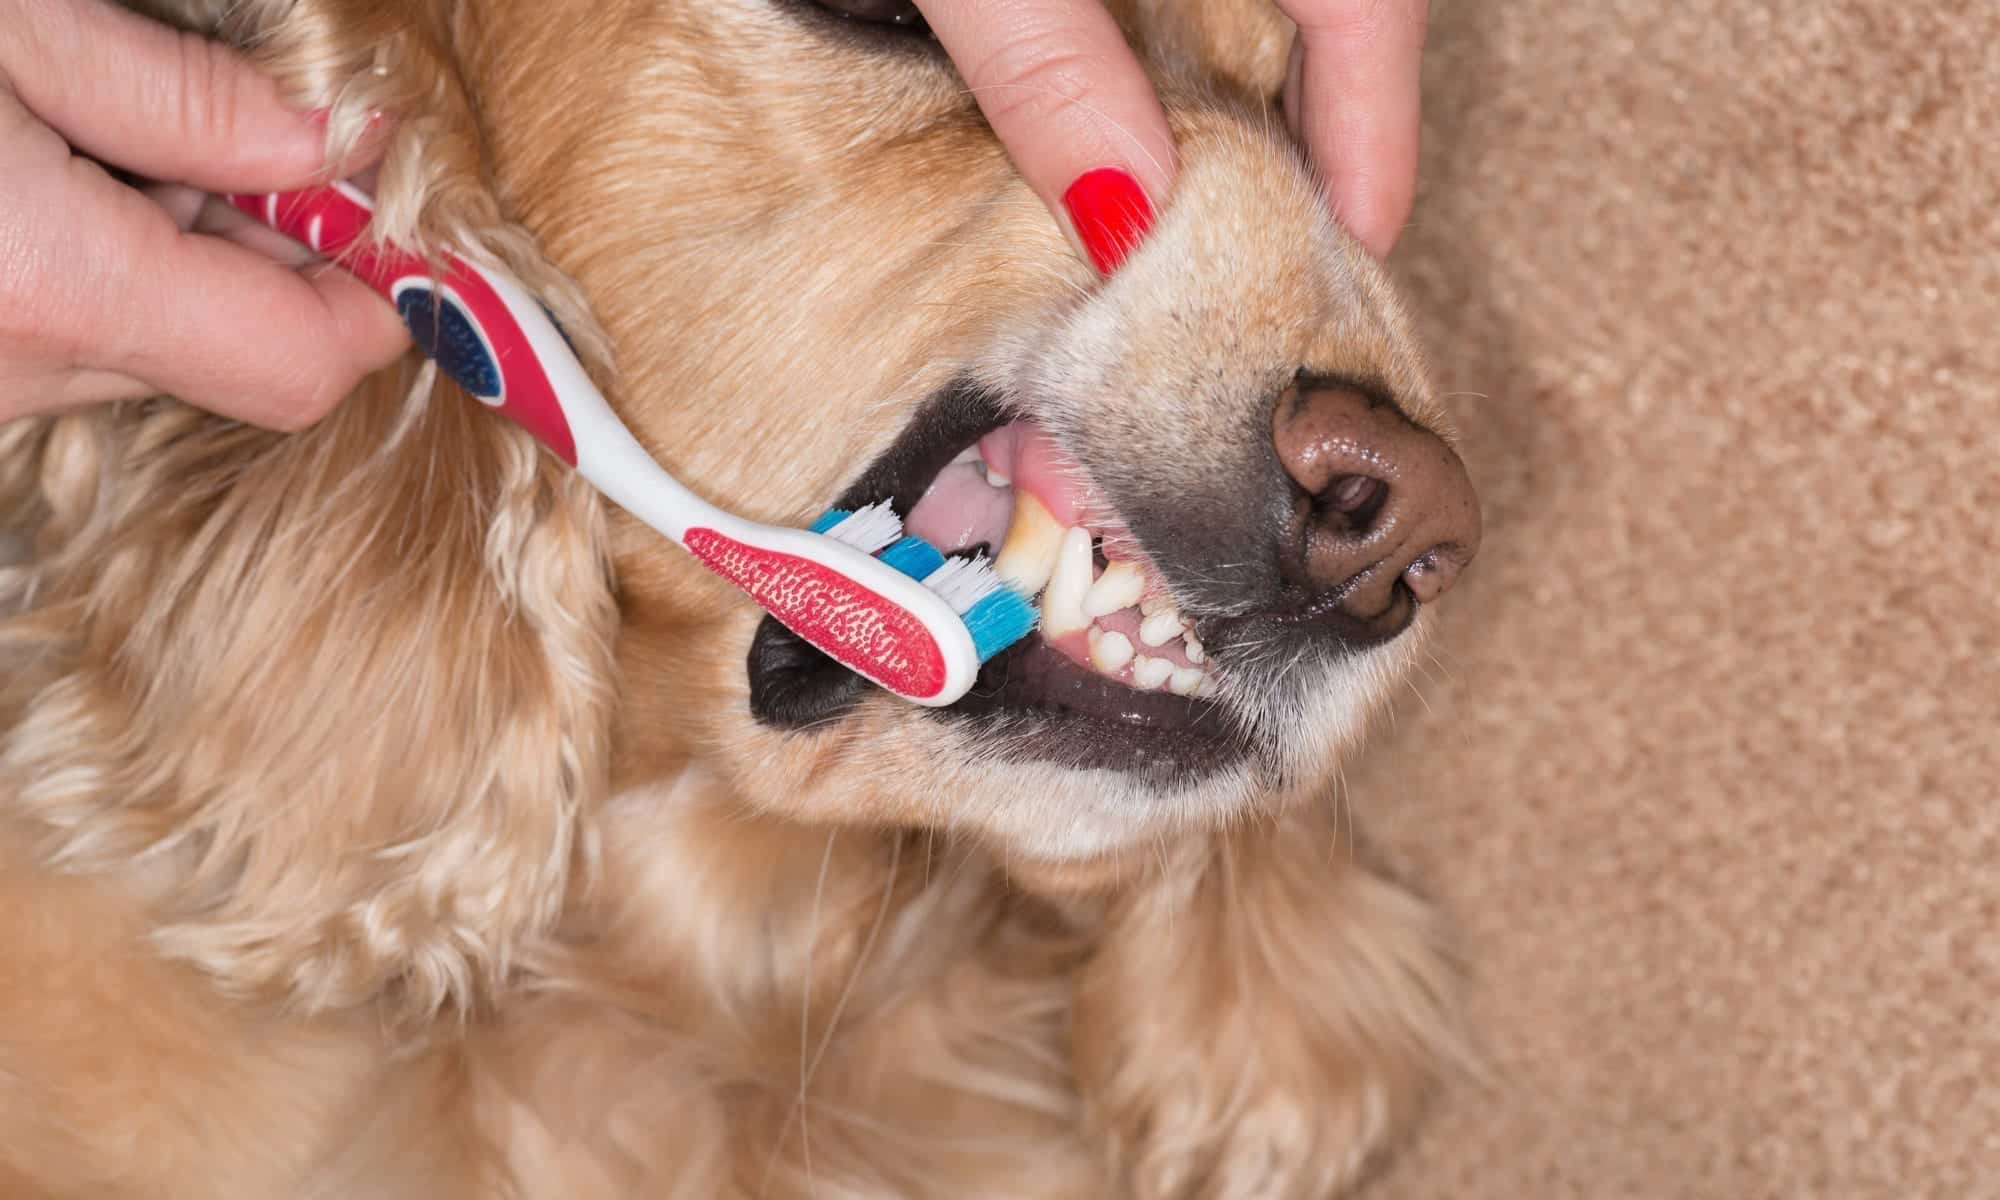 Dog Grooming Chicago - Teeth Brushing for Dogs